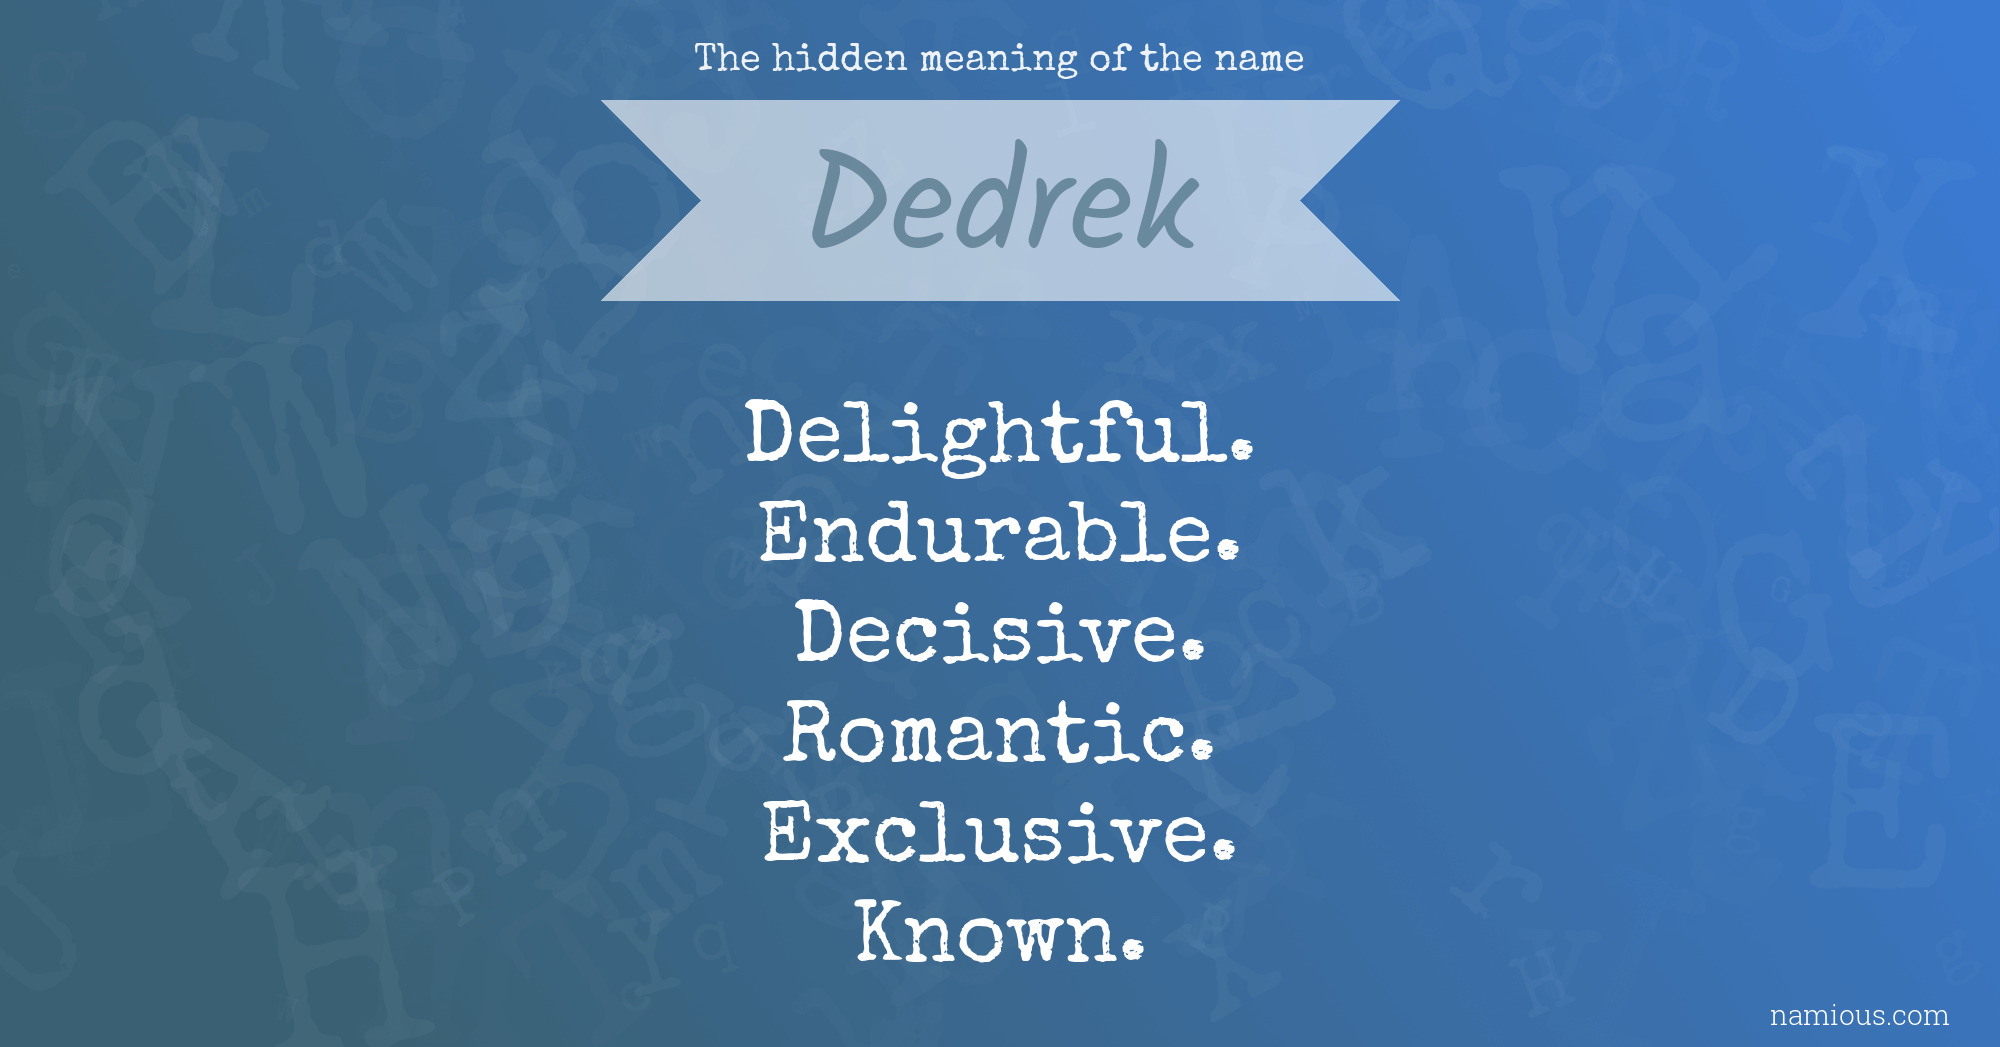 The hidden meaning of the name Dedrek